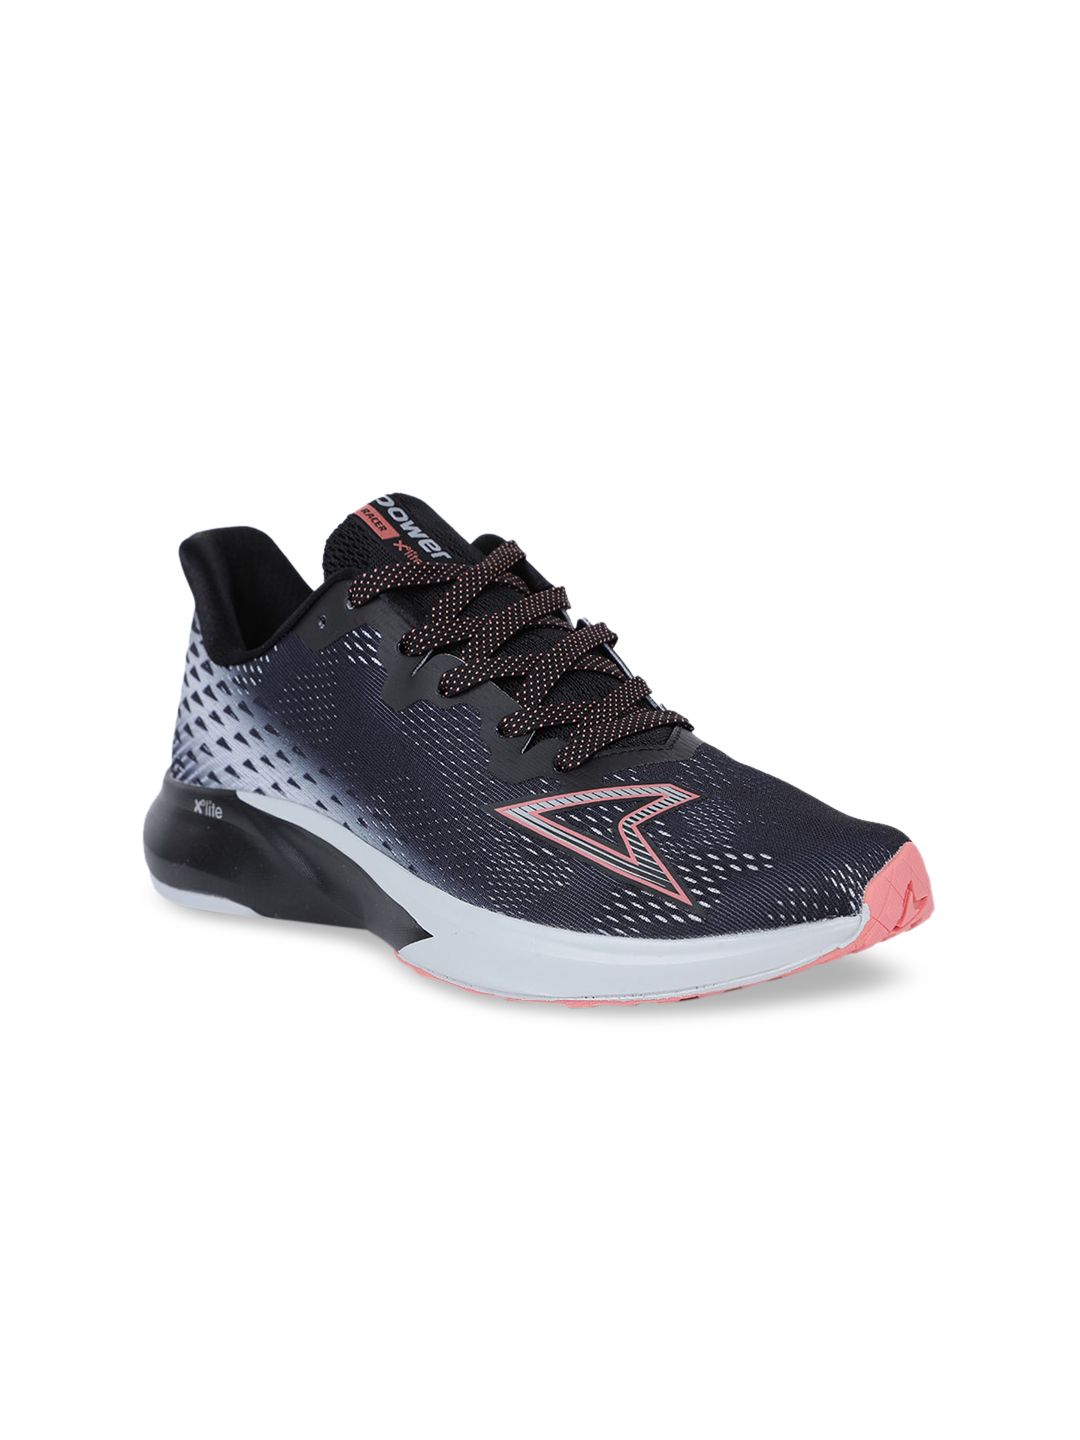 Power Women Black Running Shoes Price in India